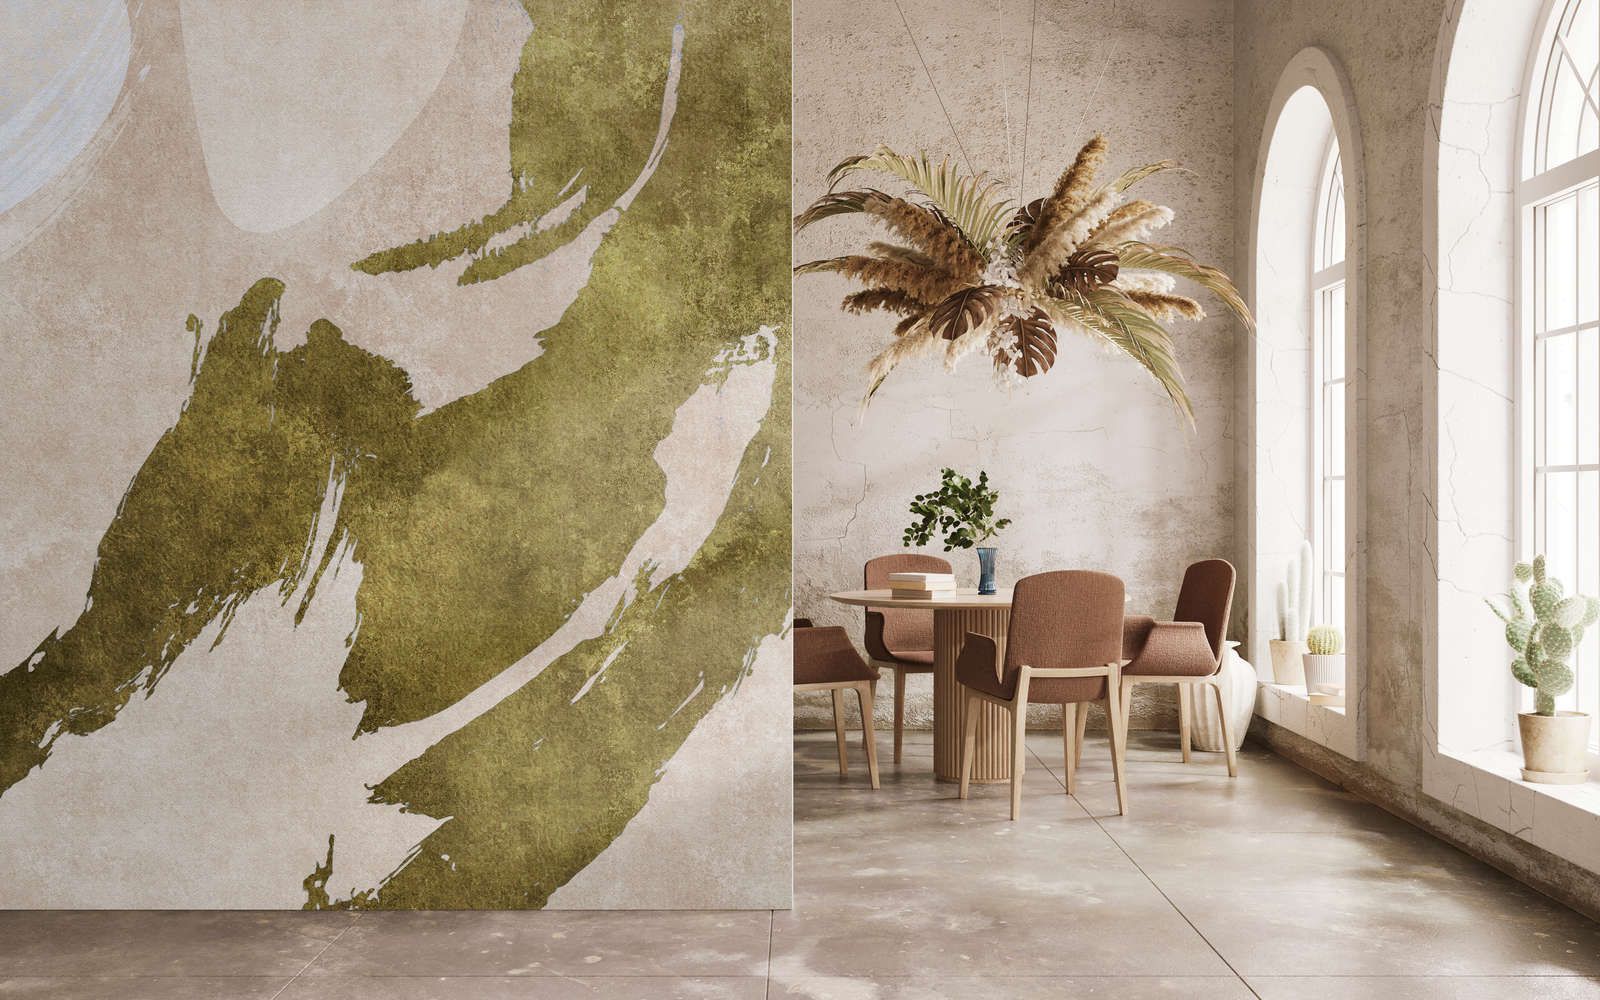             Photo wallpaper »temu« - Brushstrokes with abstract design - Green, cream with vintage plaster texture | Lightly textured non-woven
        